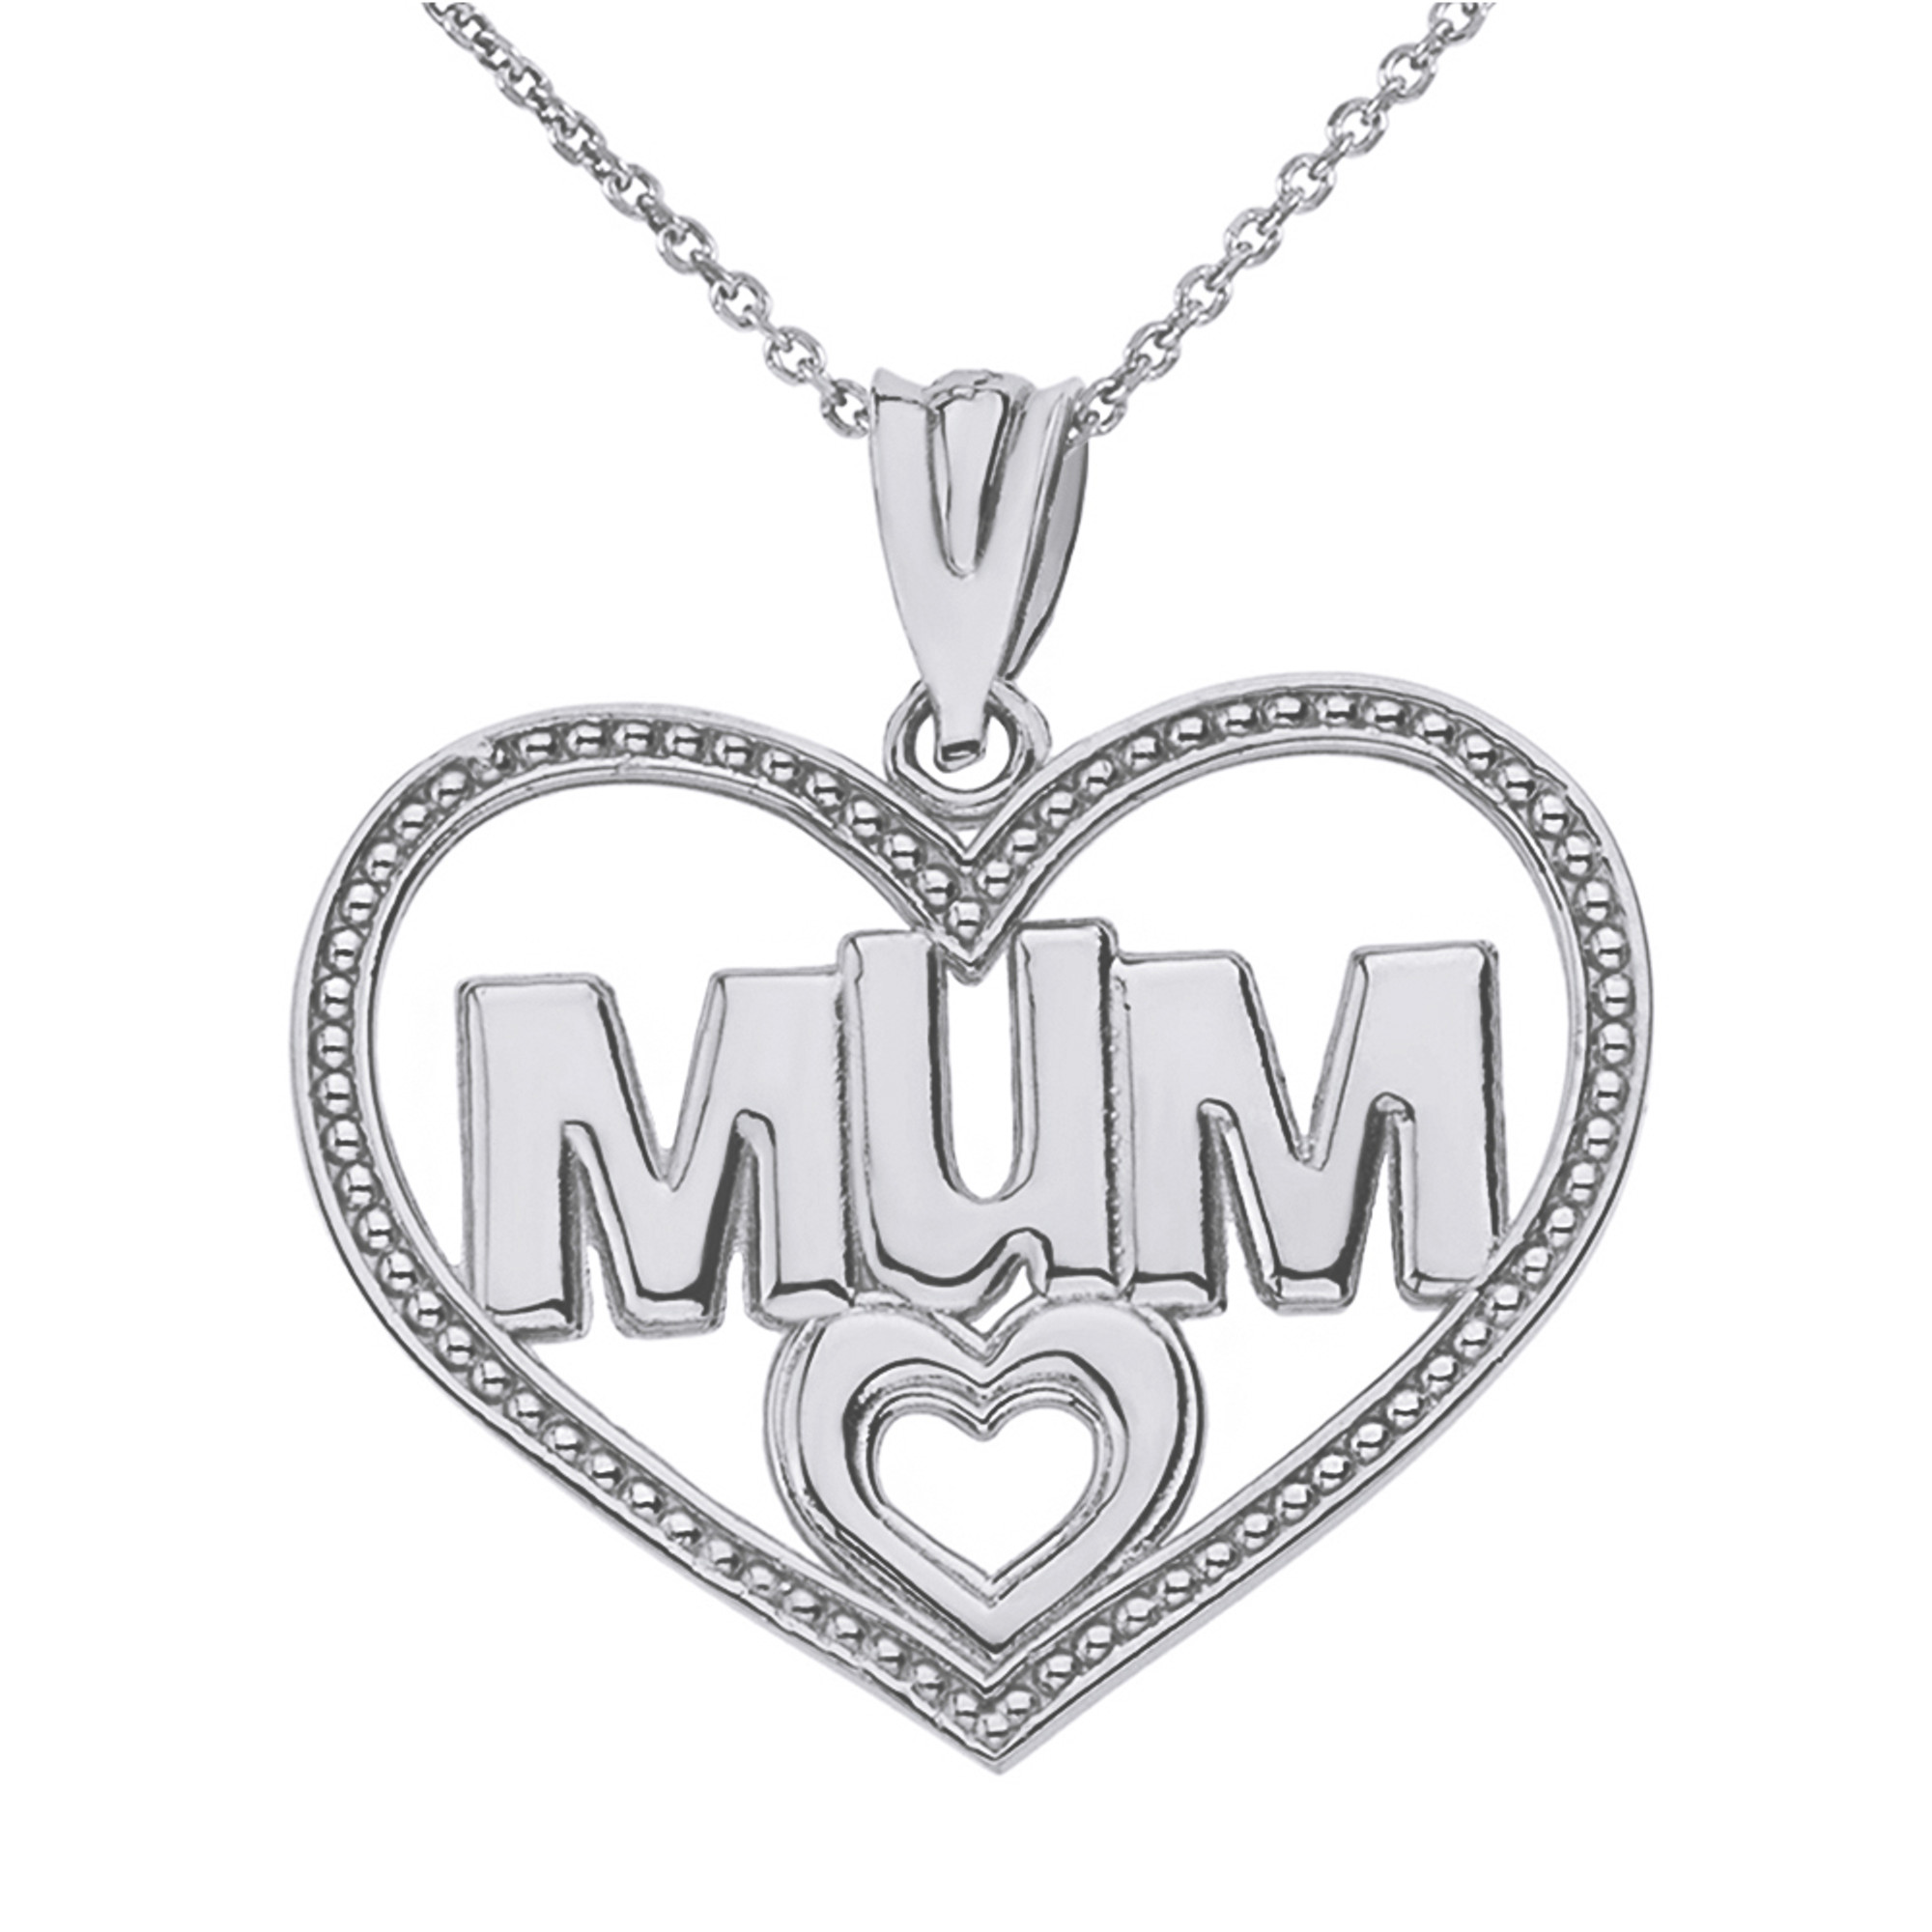 Generic MUM Letter Heart Pendant Necklace Choker Chain Mother Day Gift  Jewelry Accessory